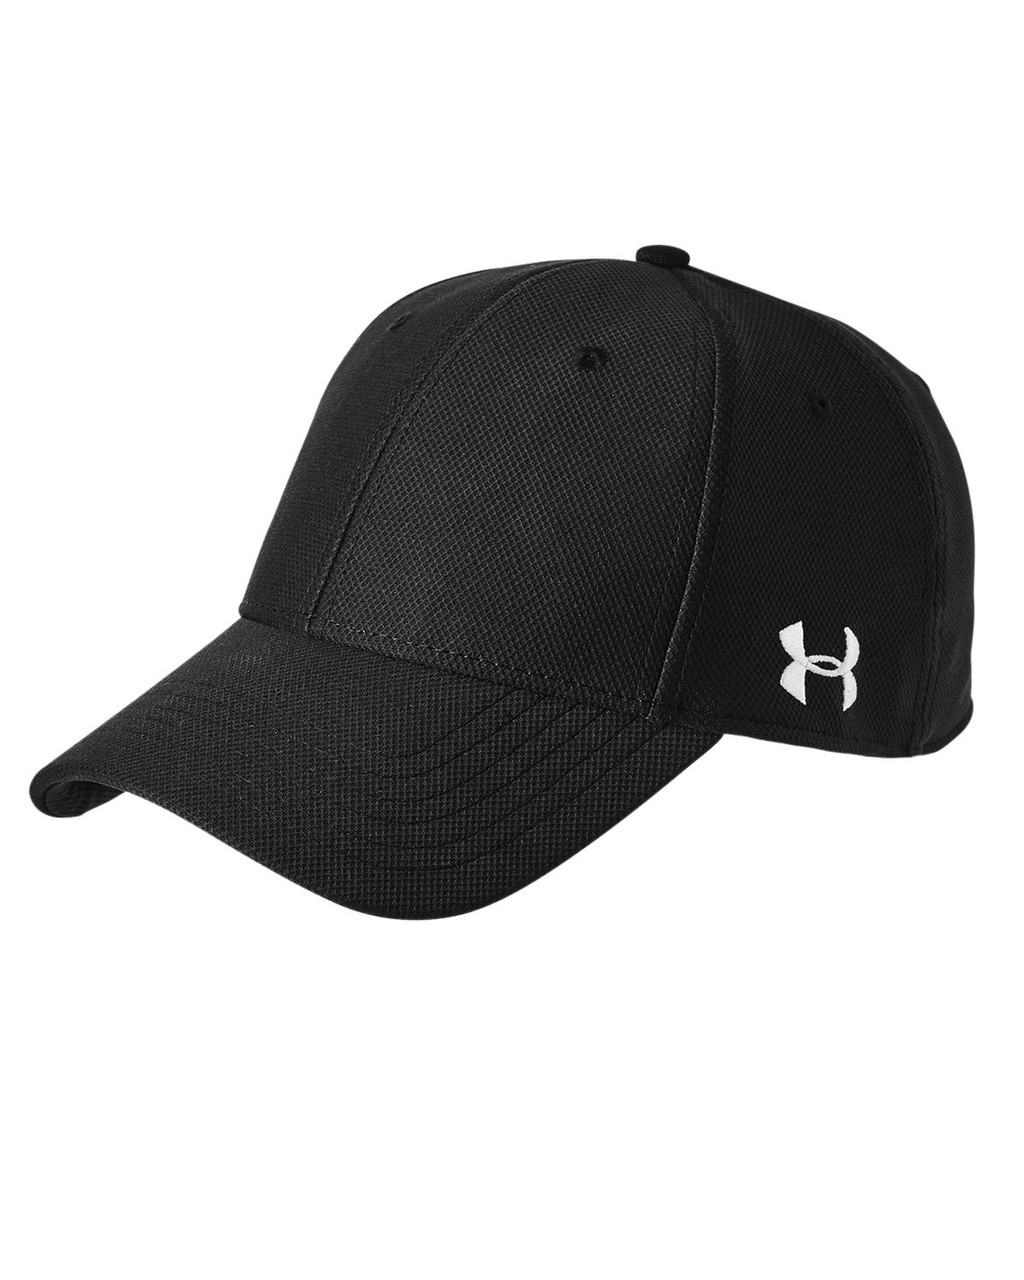 Under Armour Unisex Blitzing Curved Cap 1325823 BLACK_001 Side